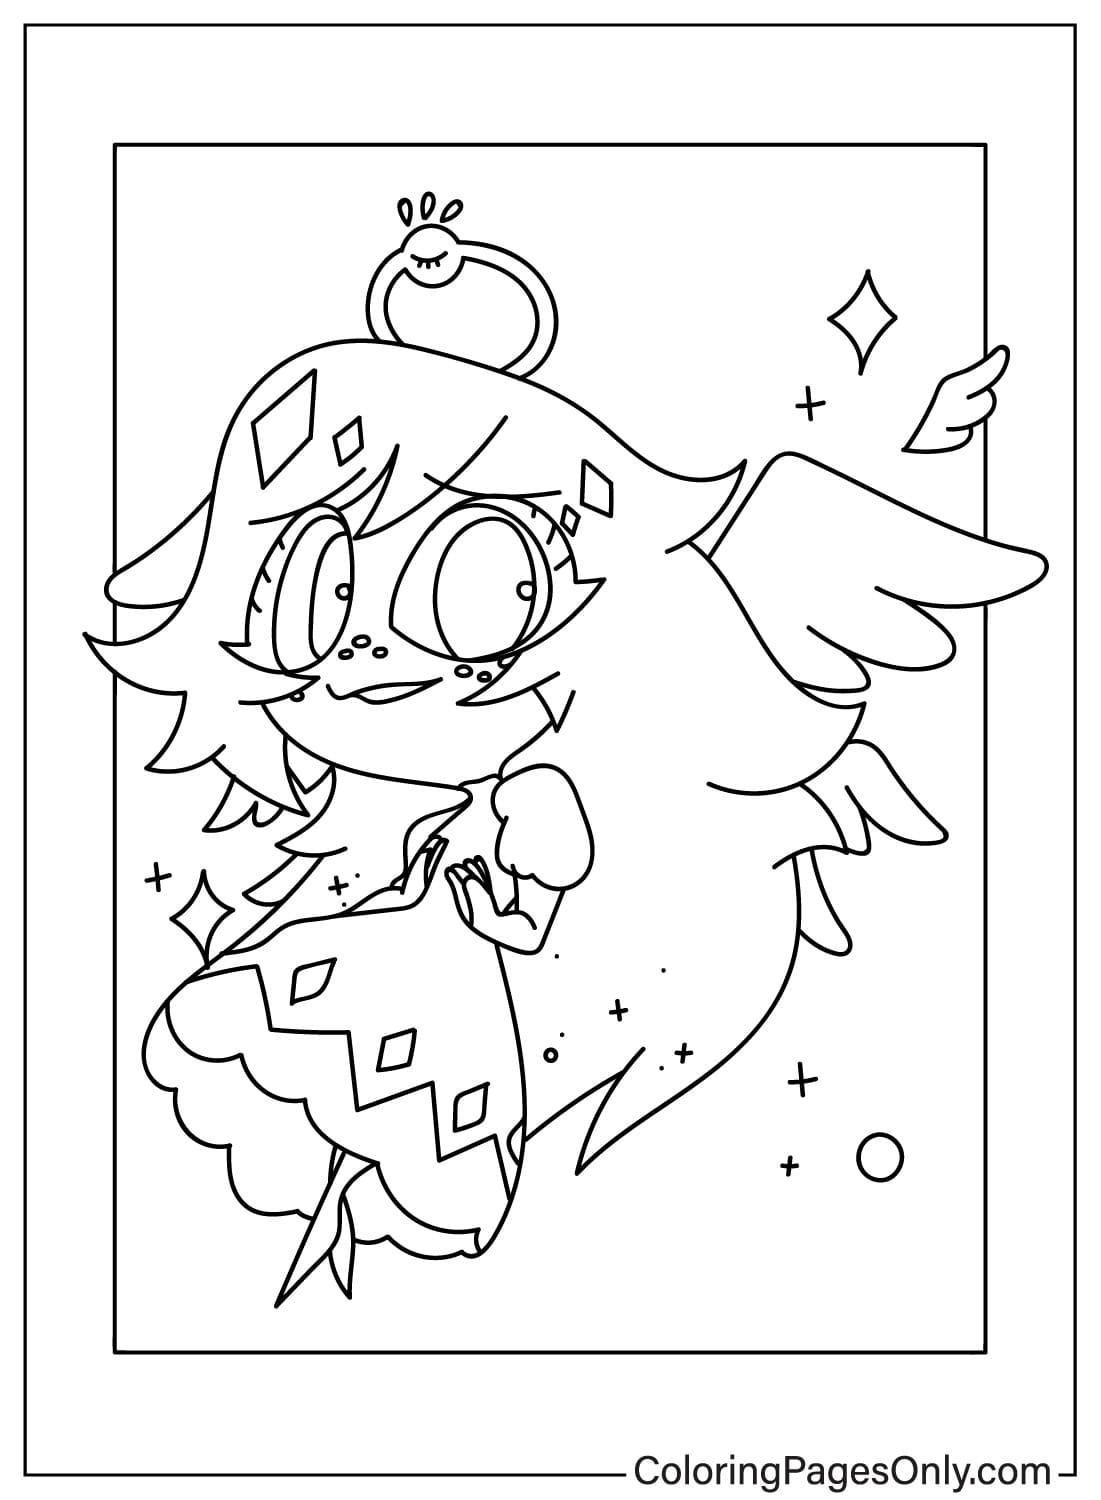 Chibi Emily Coloring Page from Emily